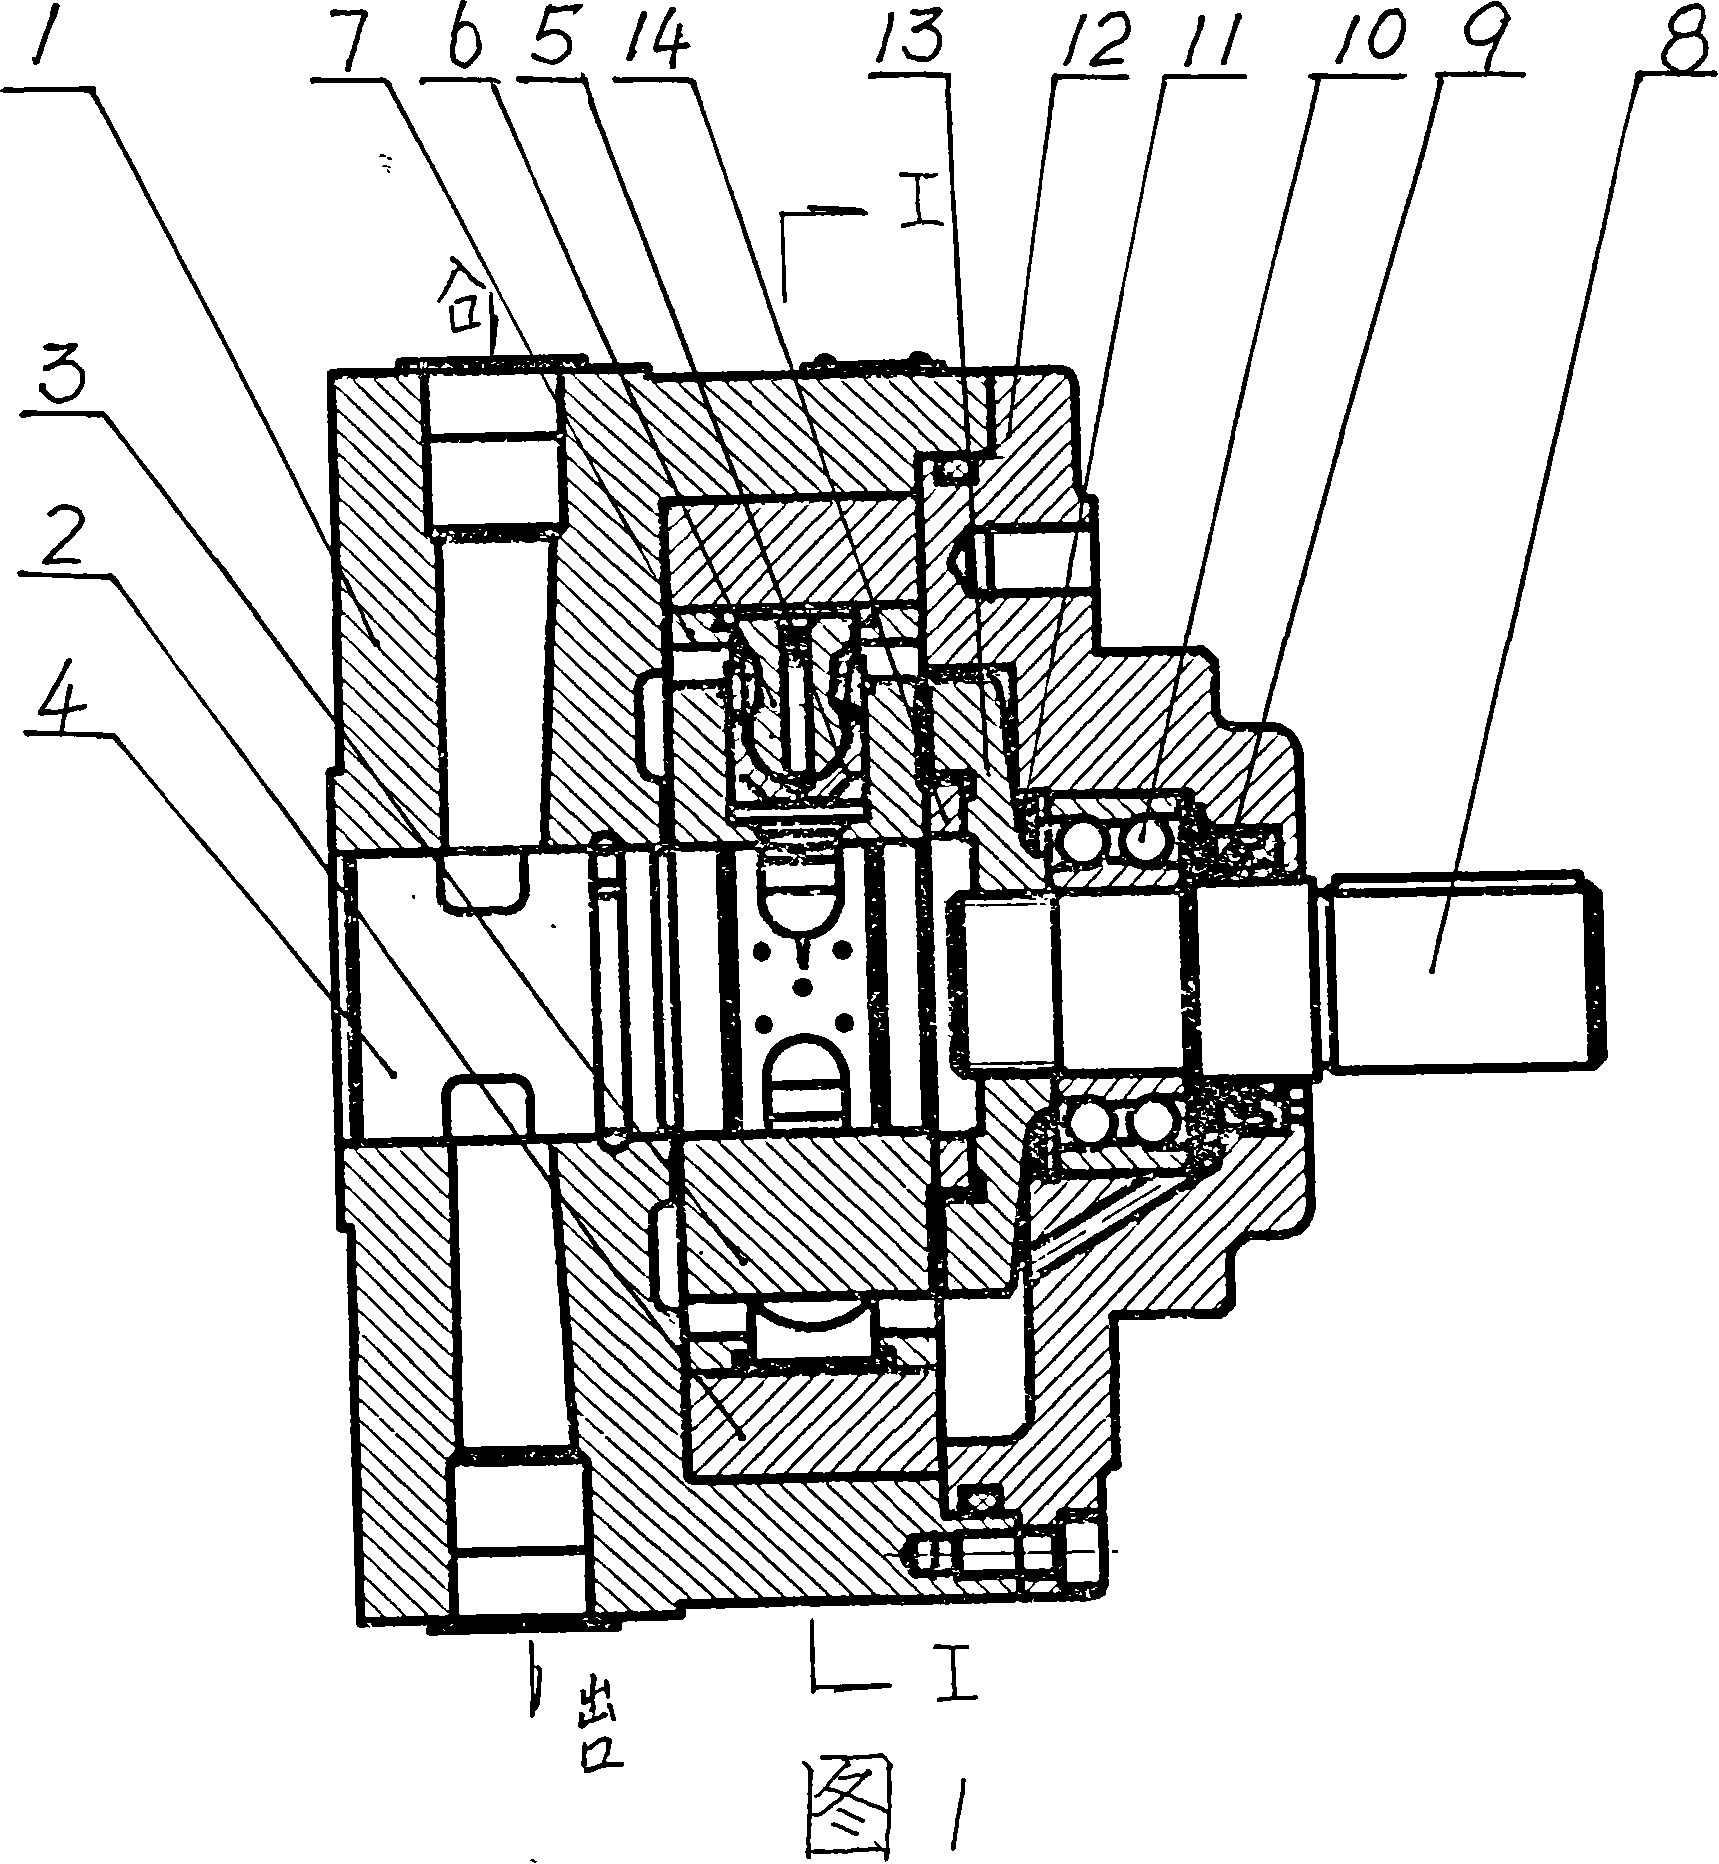 Constant-pressure variable radial-plunger pump